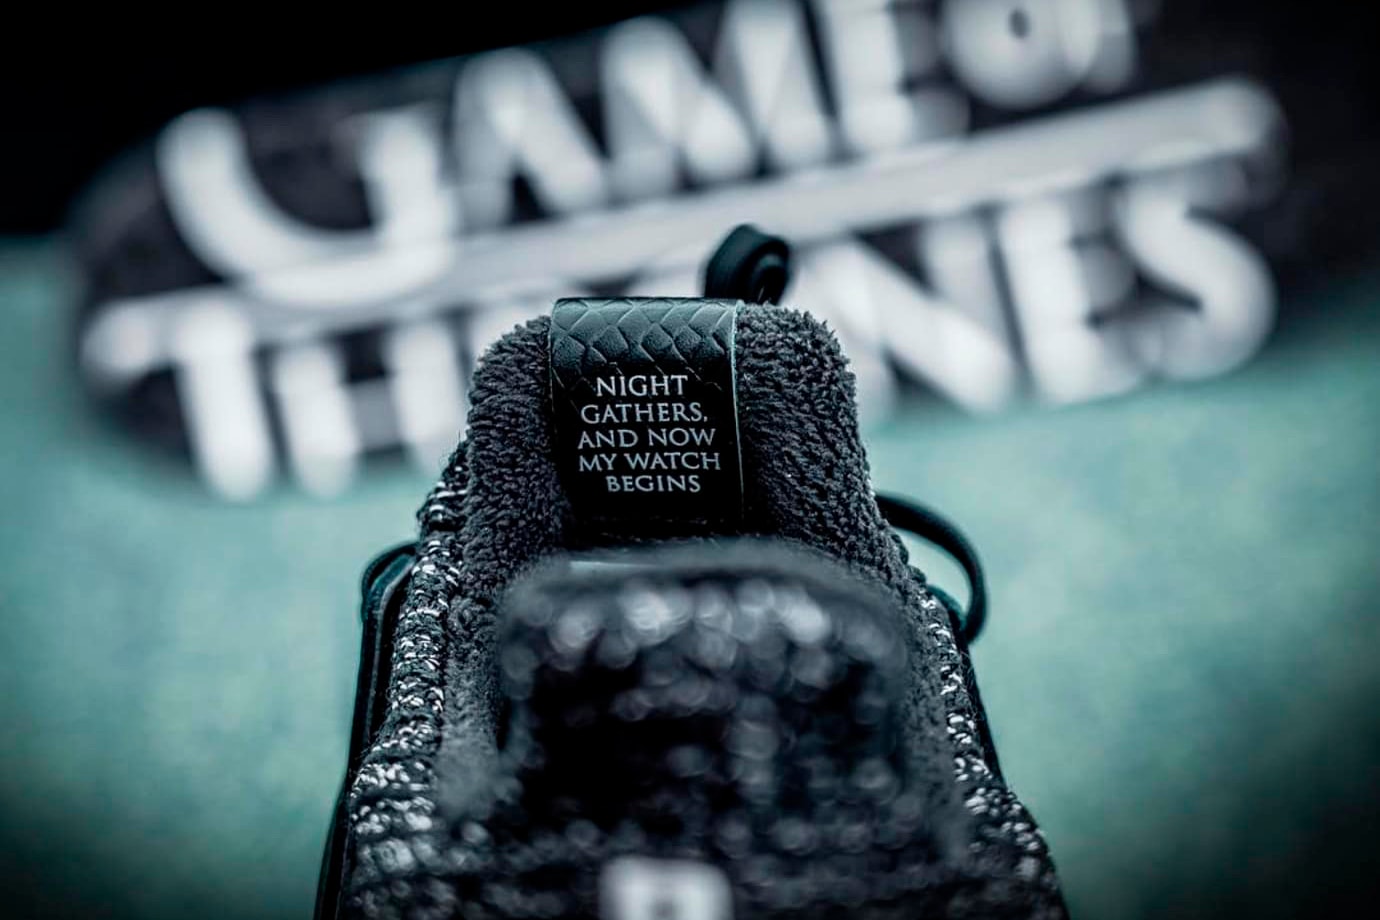 'Game of Thrones' x adidas UltraBOOST "Night's Watch" first look release got hbo jon snow